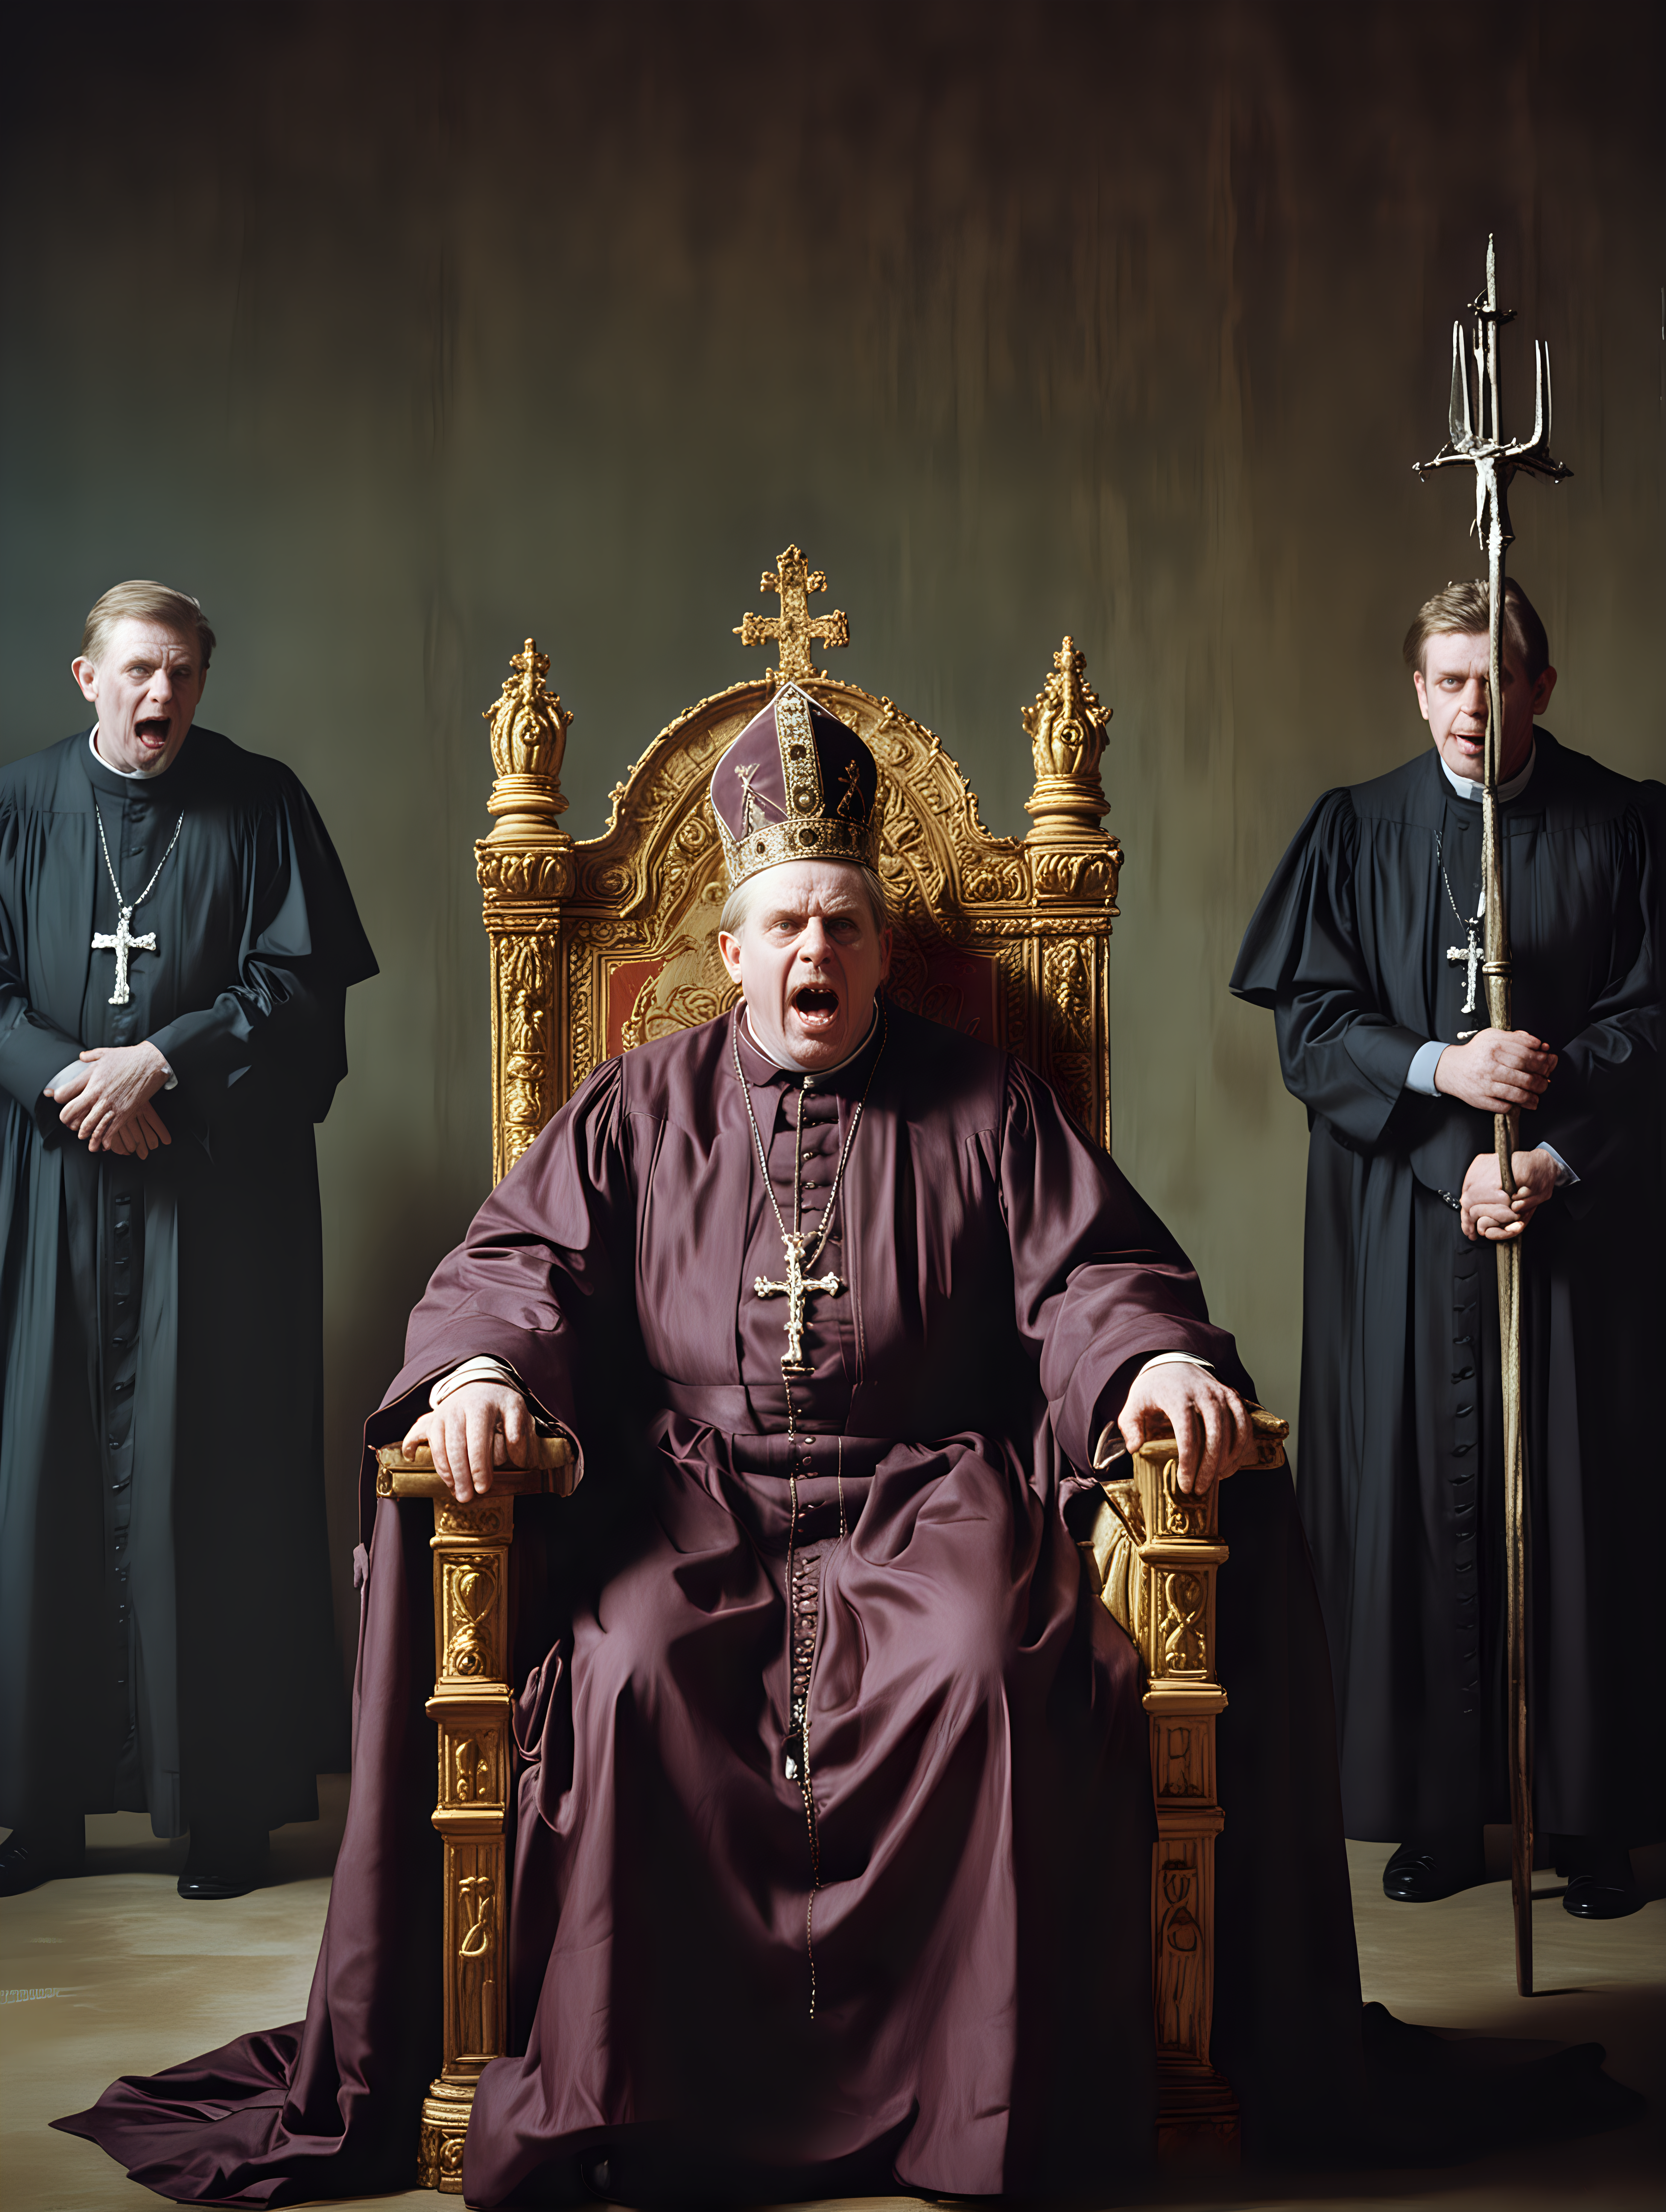 Surrealist Bishop Dissolving on Throne with Flash Photography